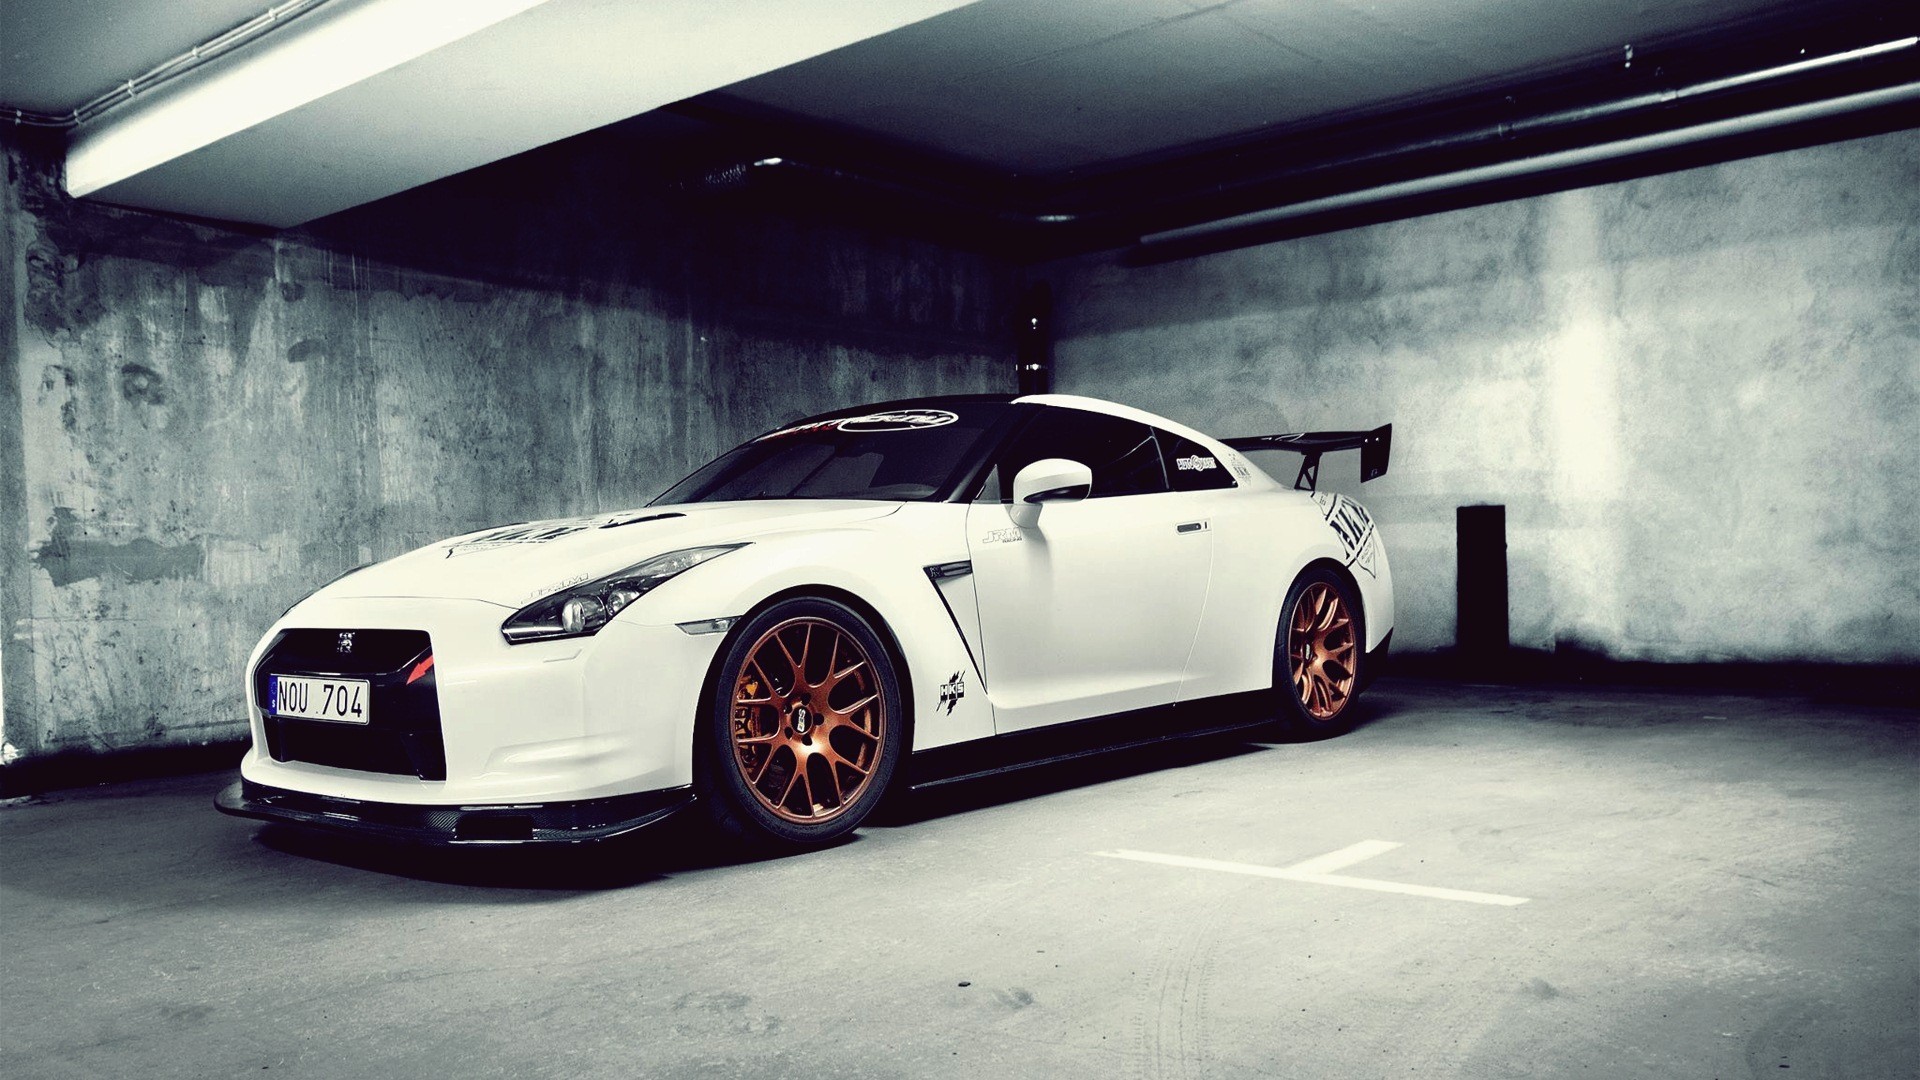 General 1920x1080 Nissan GT-R NISMO Nissan white cars numbers vehicle car Nissan GT-R Japanese cars